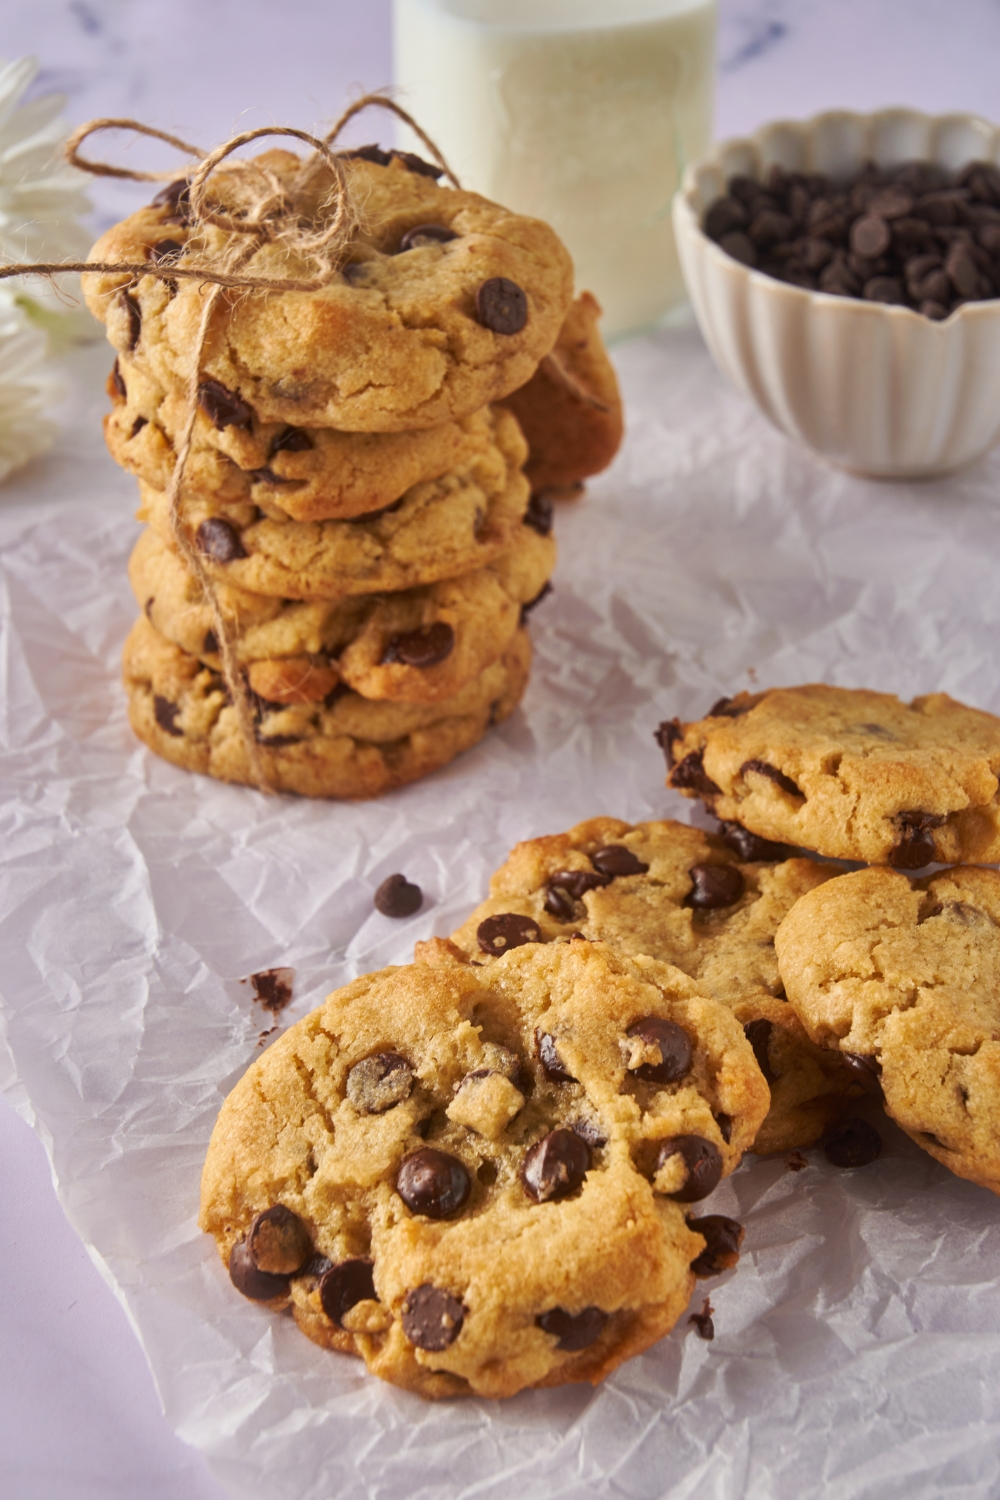 A pile of chocolate chip cookies and a neat stack of cookies tied together by twine.